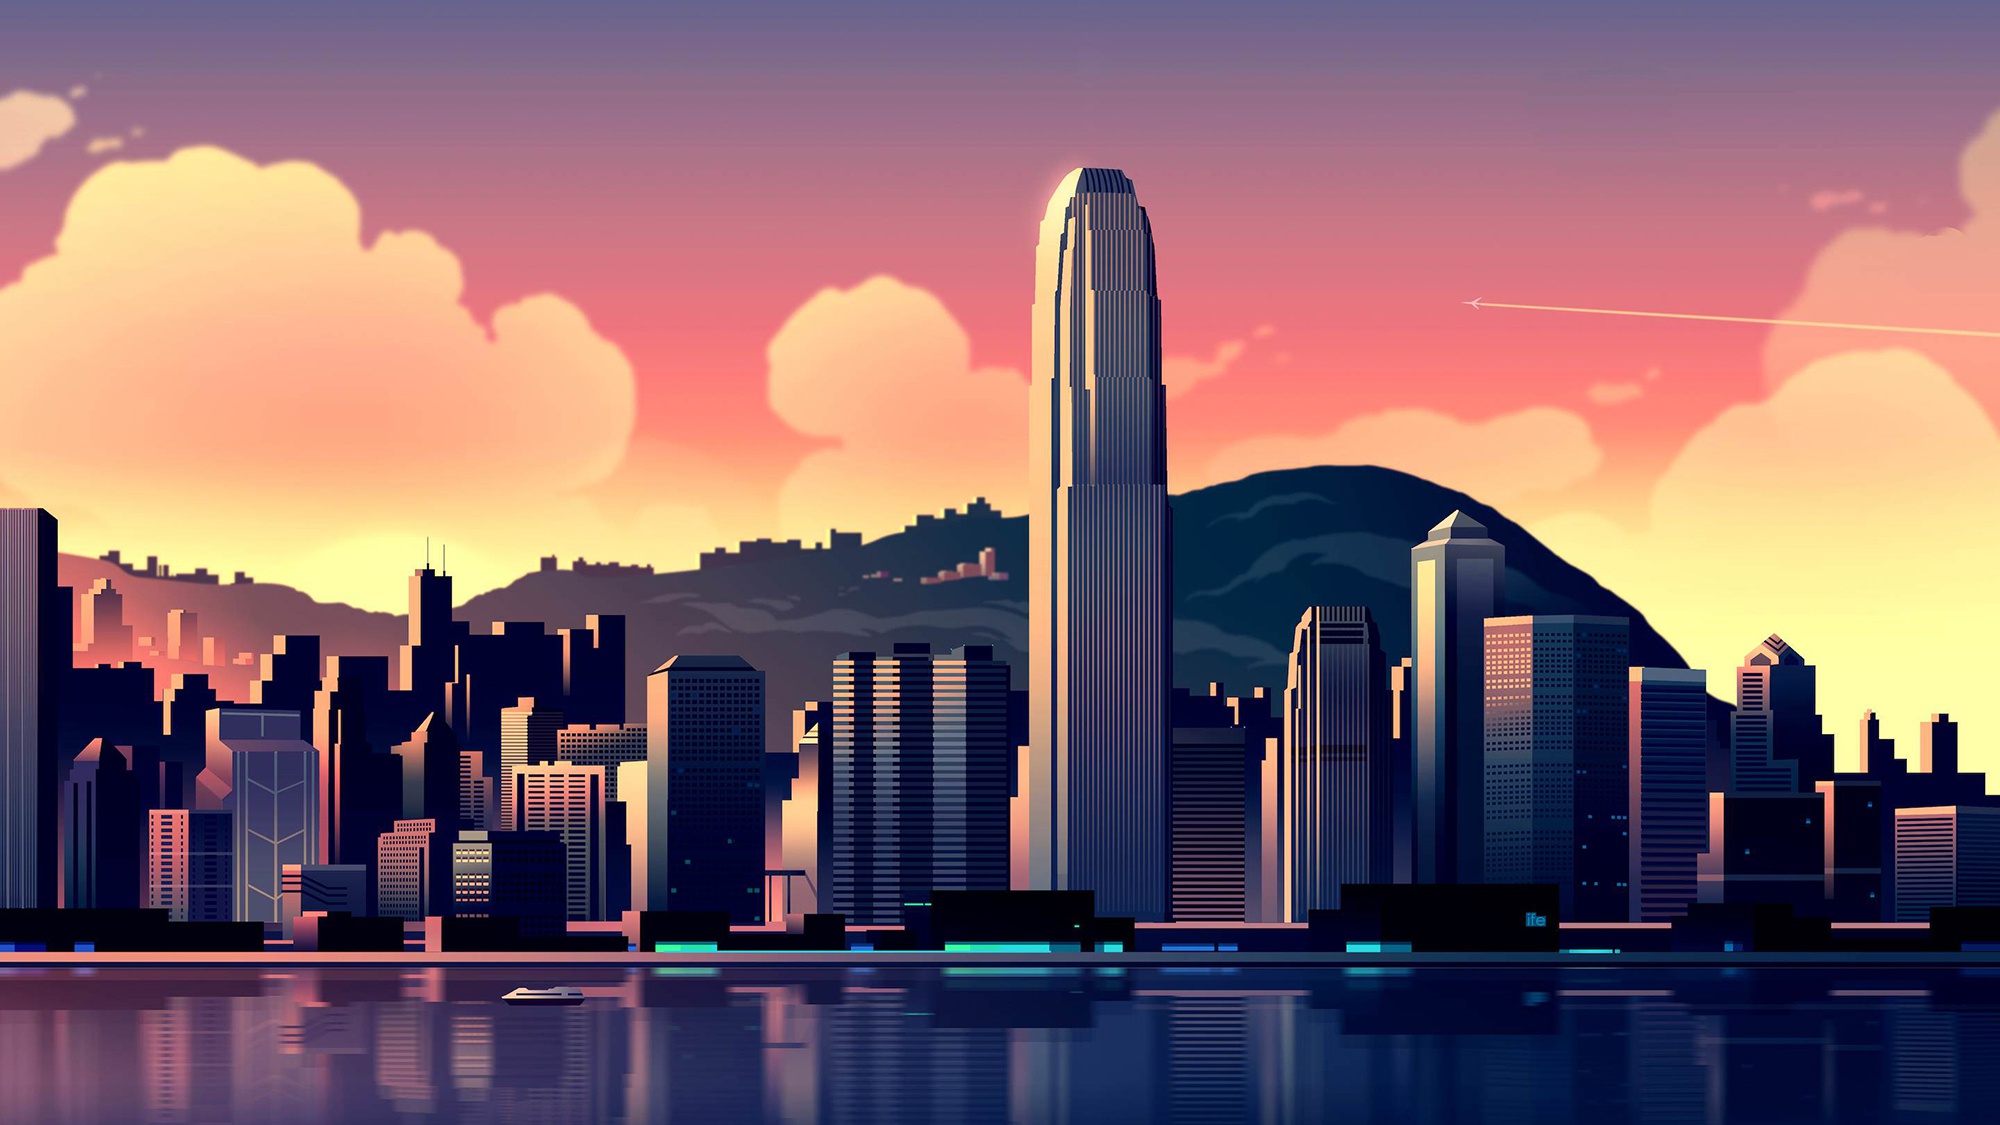 Artistic City HD Wallpaper | Background Image